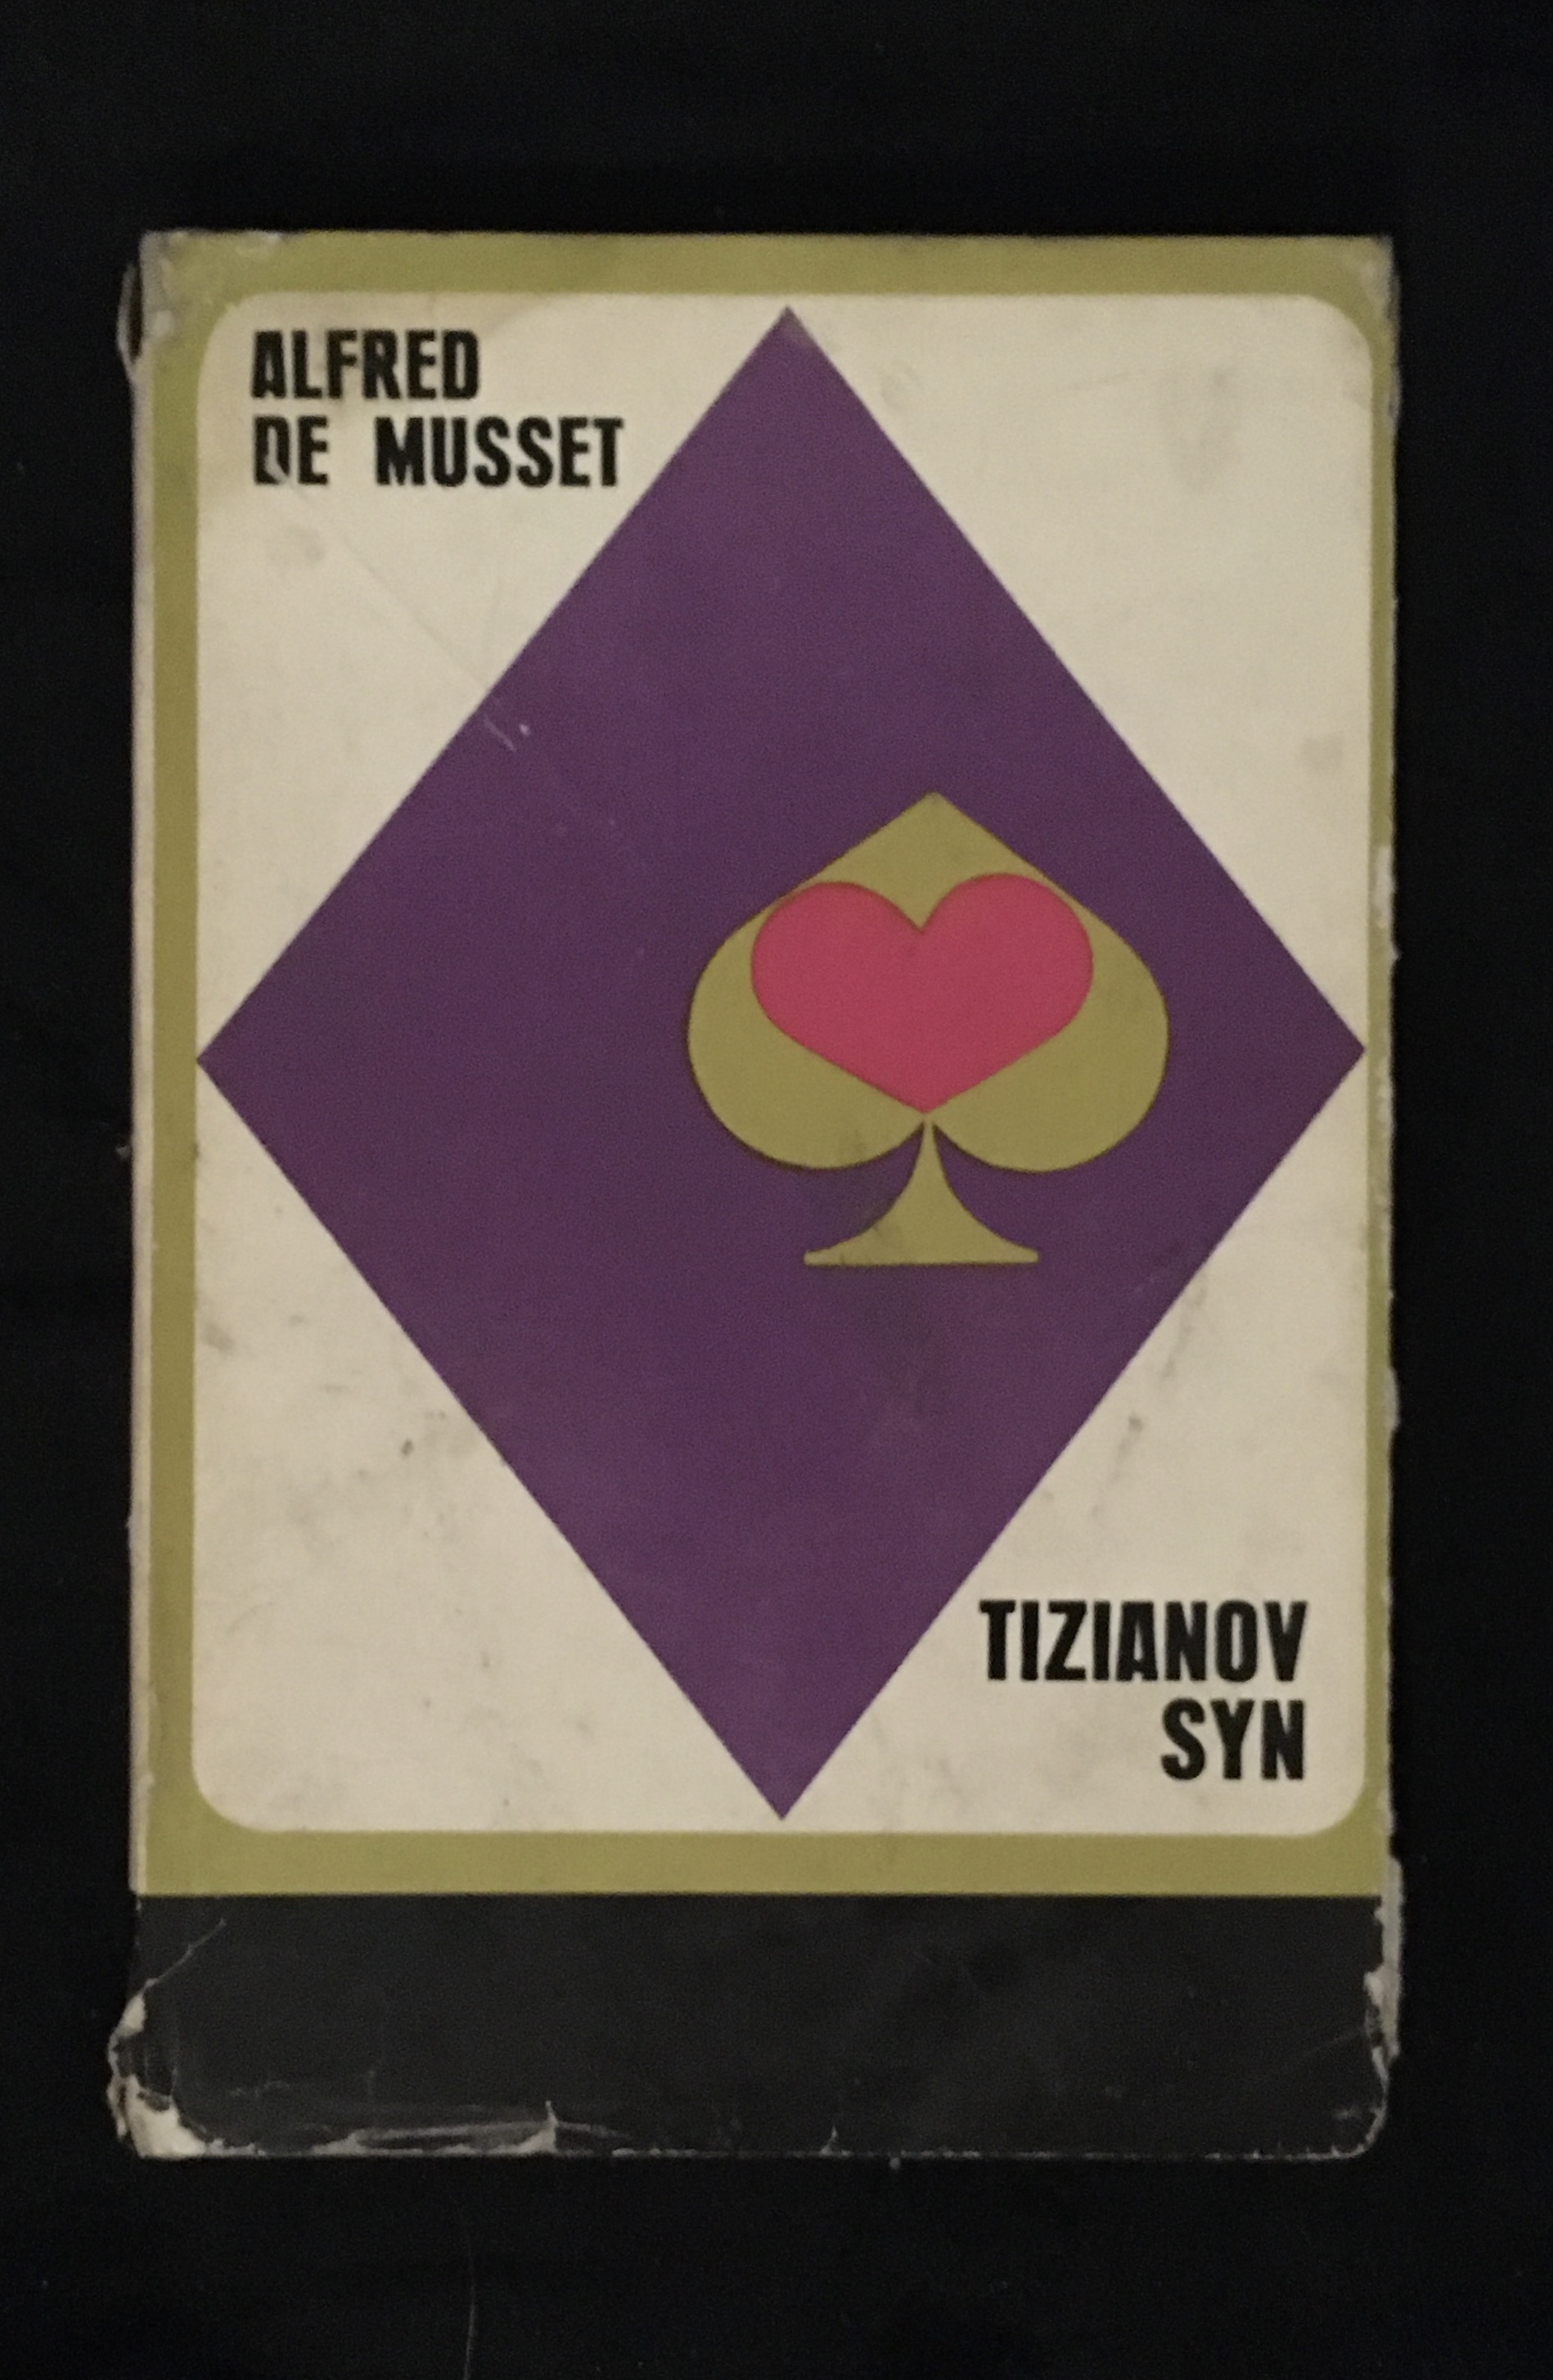 Alfred de musset -Tizianov syn